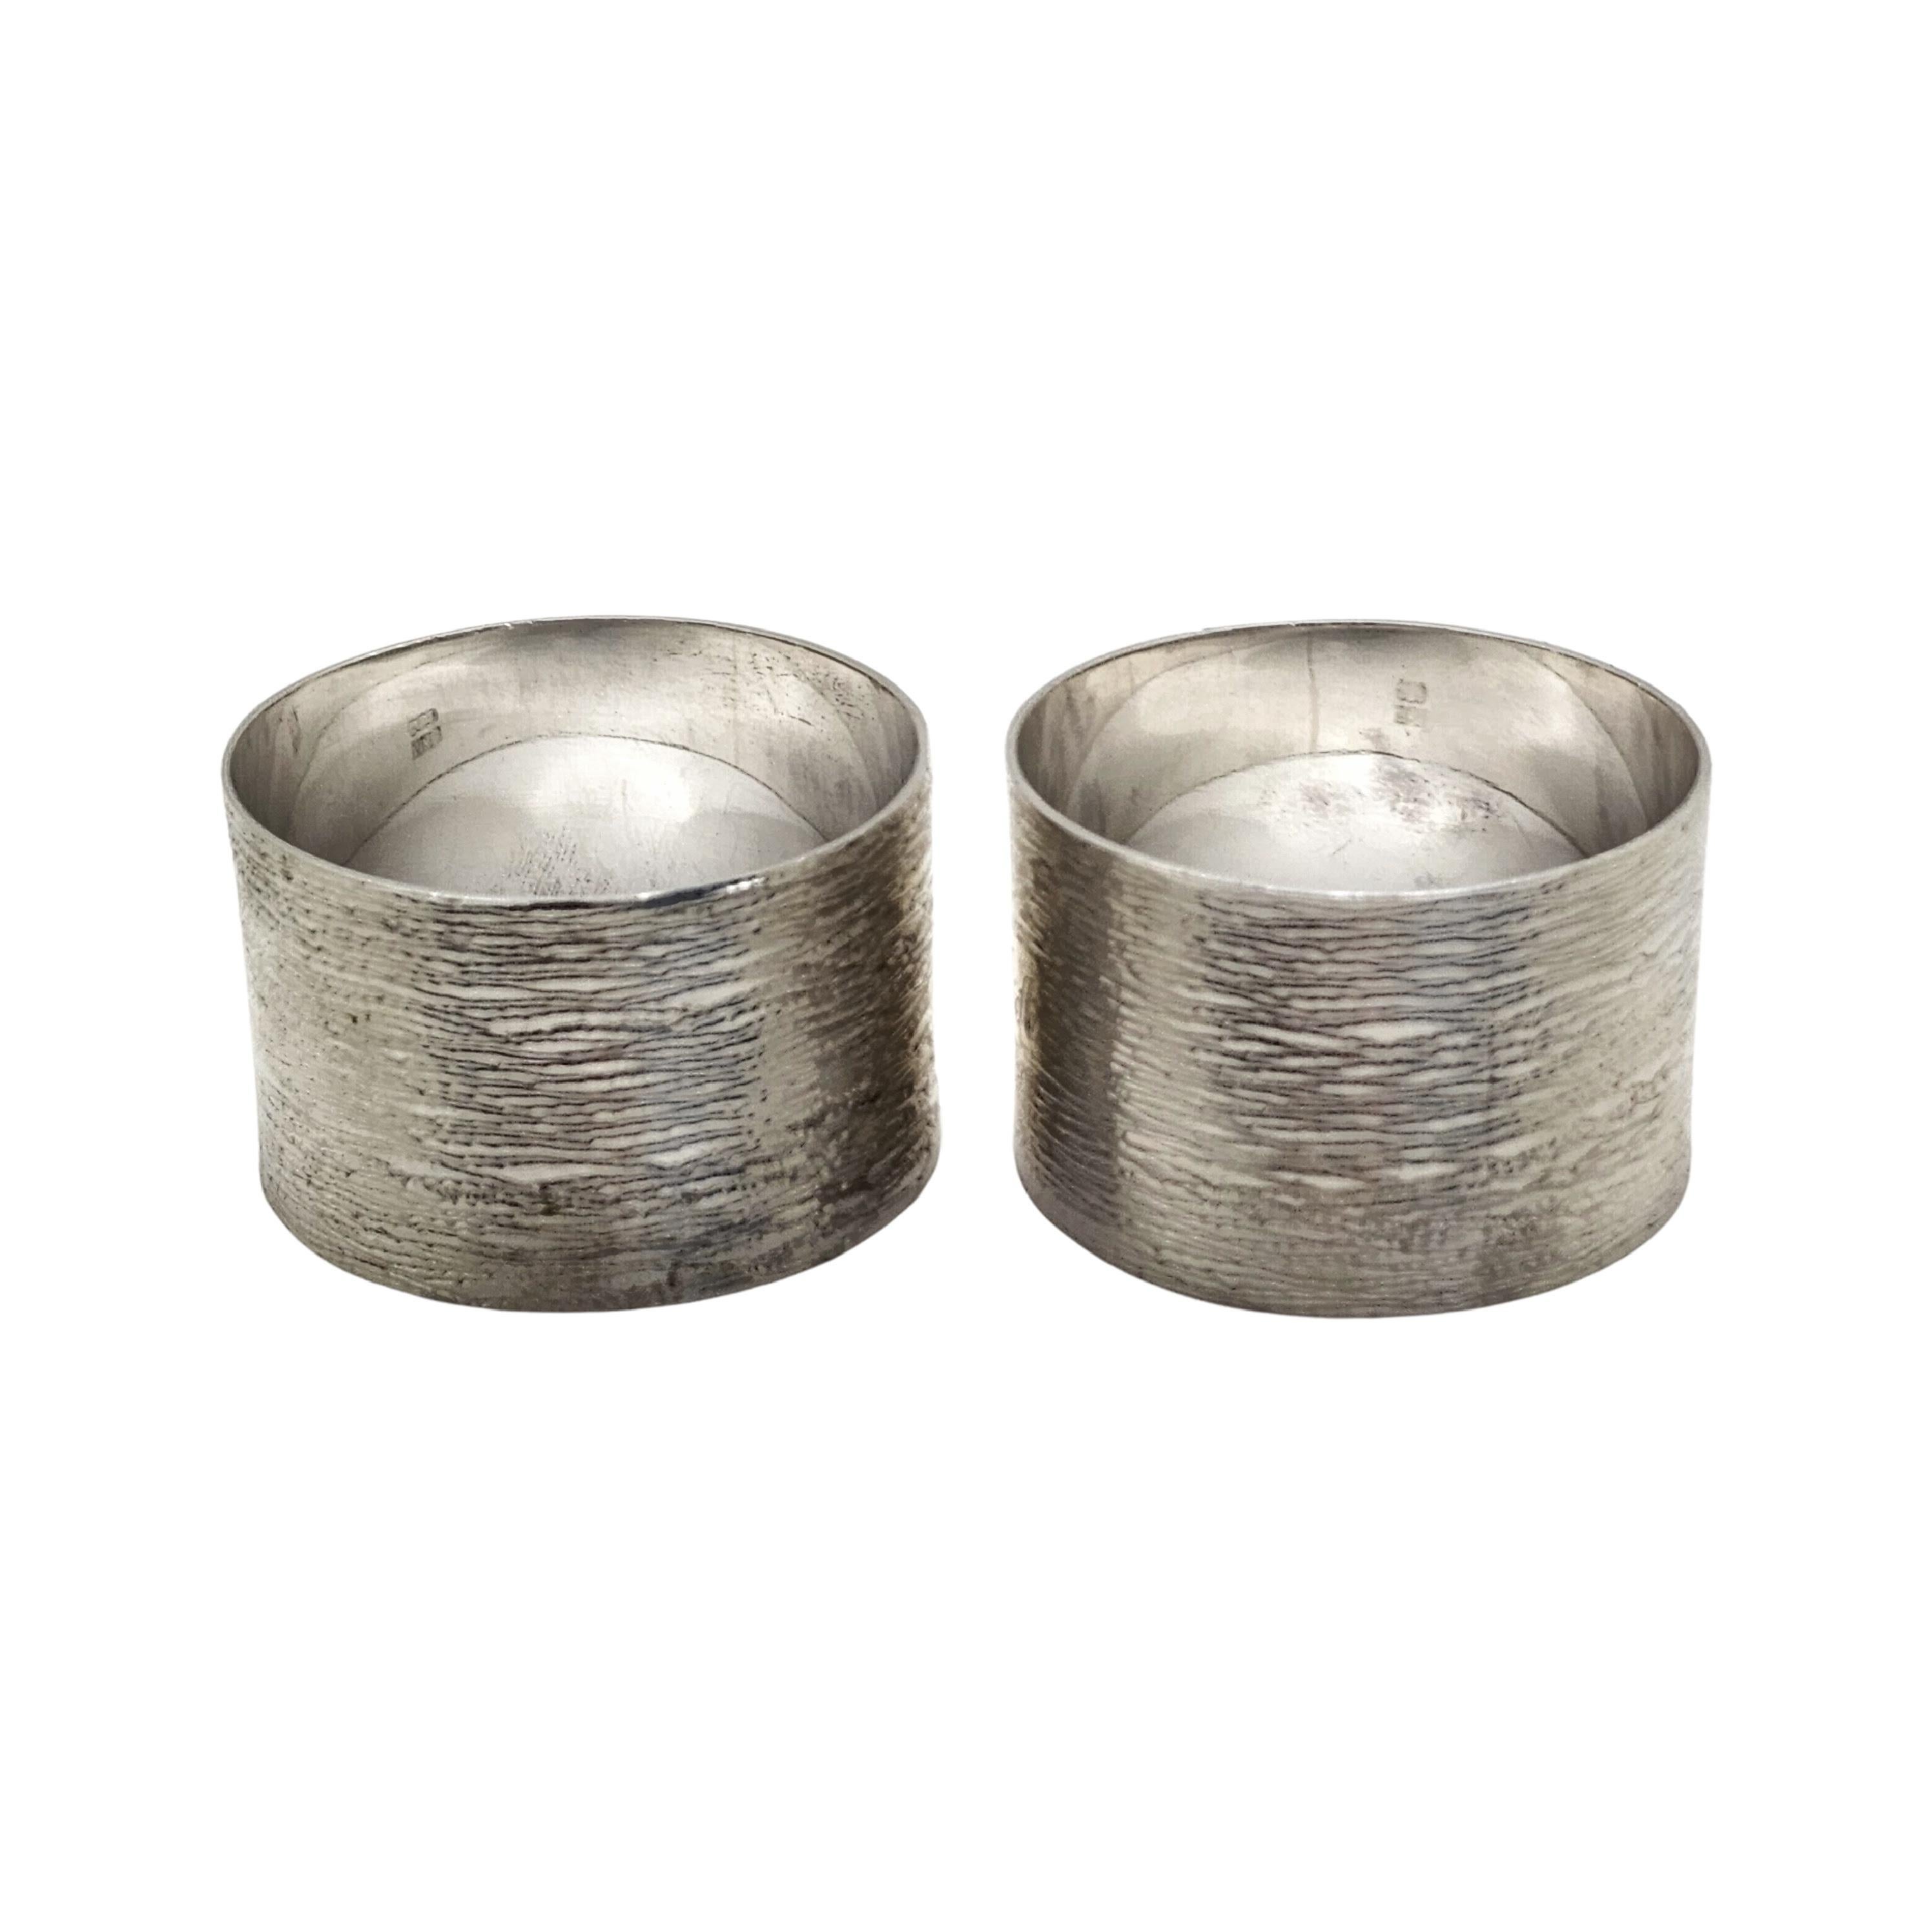 Set of 2 sterling silver napkins rings by Joseph Gloster of Birmingham, England, circa 1973.

Each napkin ring has a different monogram, appears to be BA and MA

Textured design finish.

Measures approx 1 1/16